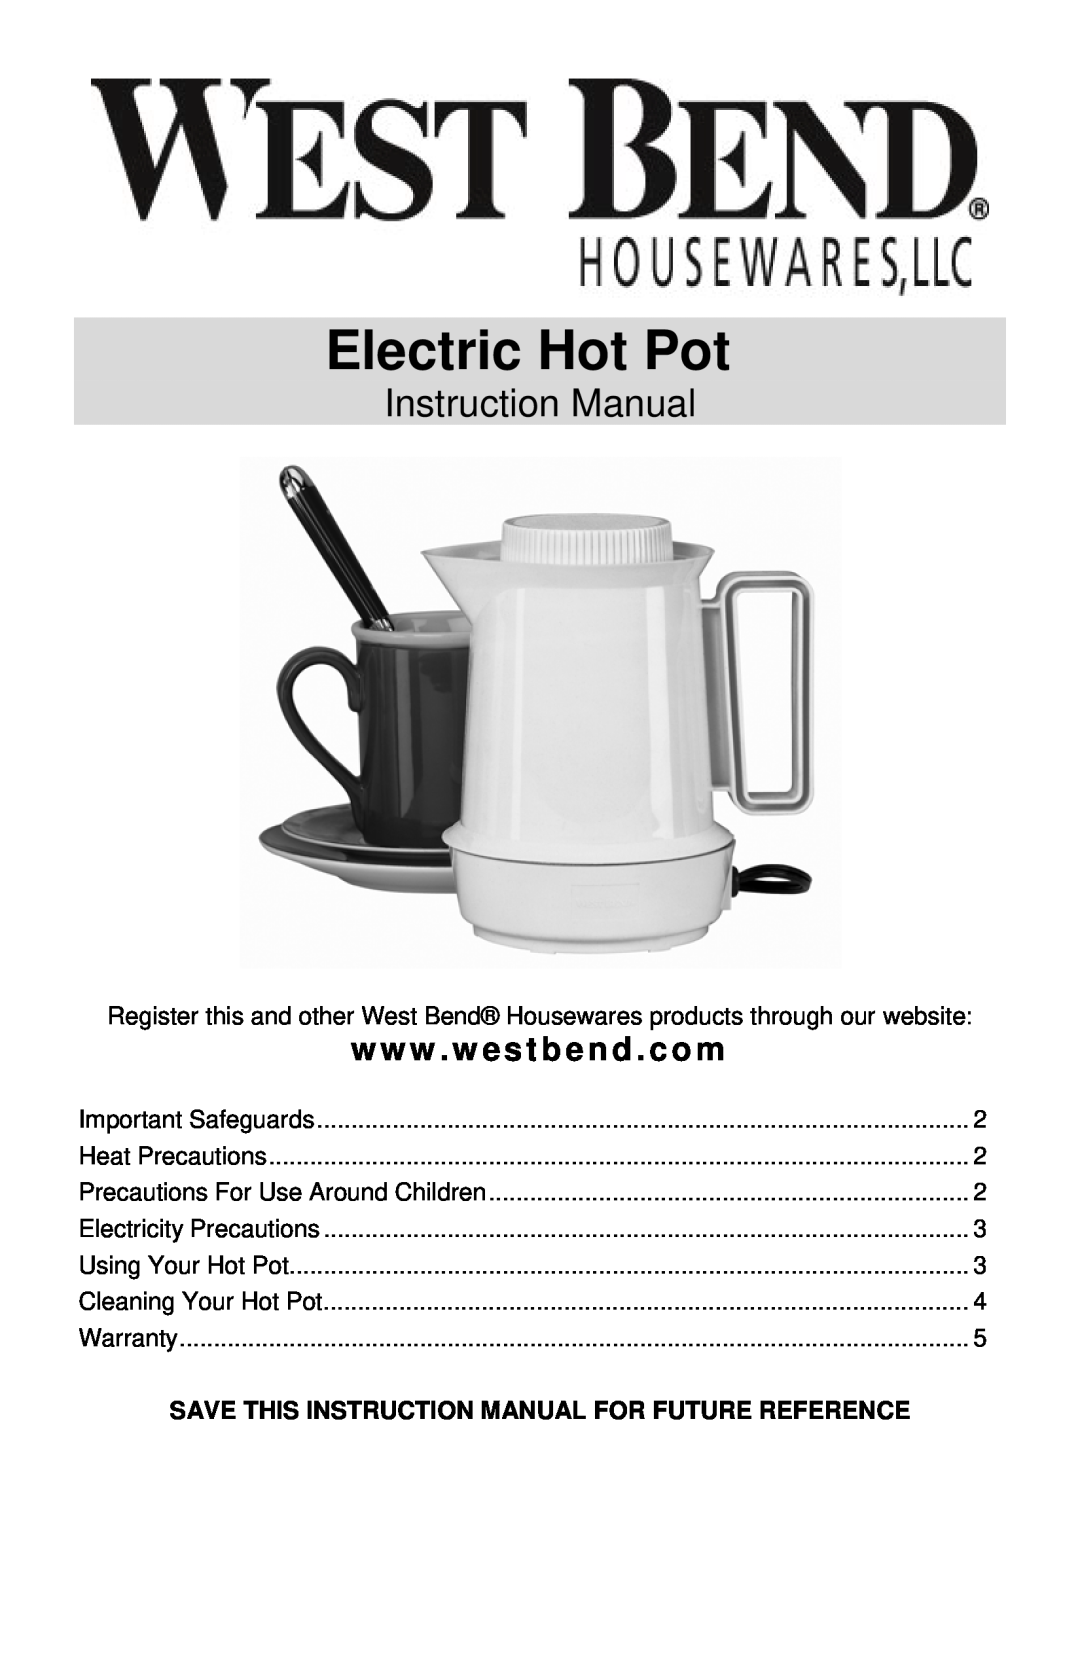 West Bend Electric Hot Pot instruction manual www . westbend . com 